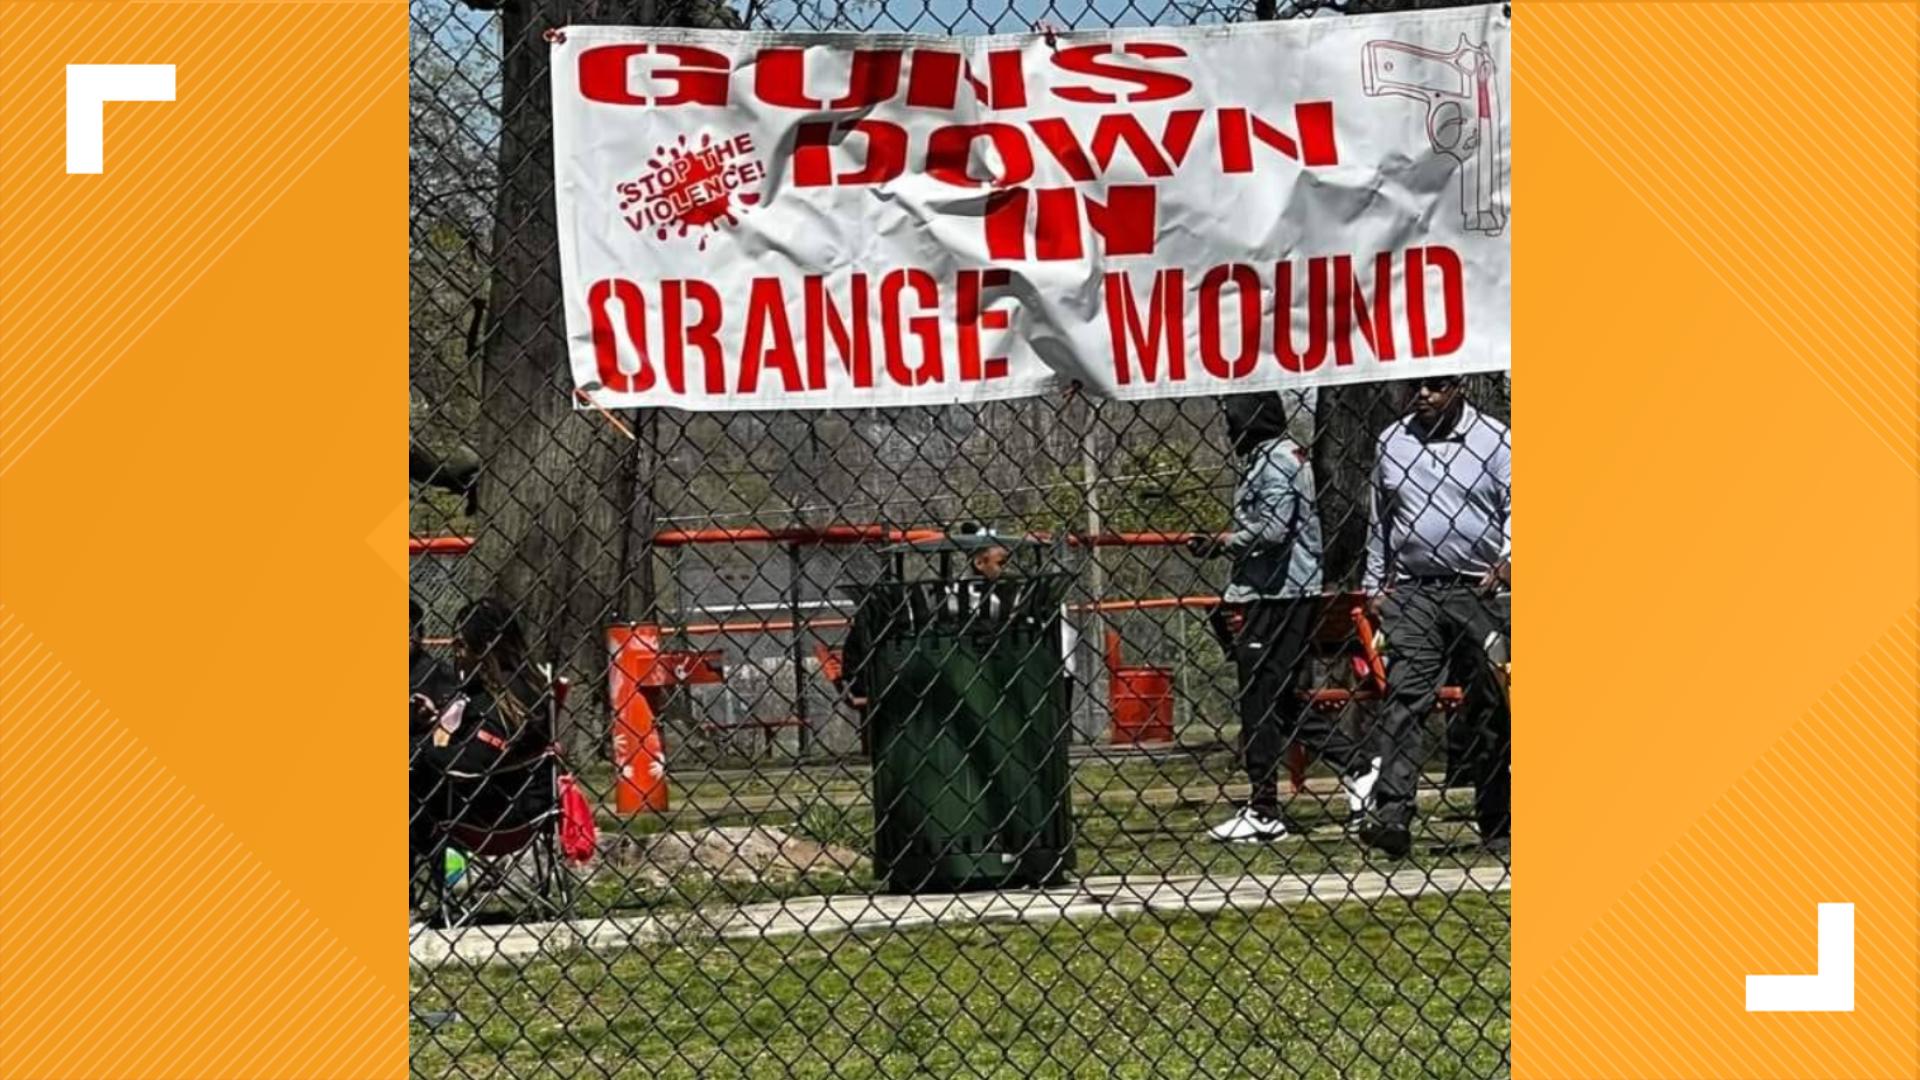 Guns Down in Orange Mound is working to combat crime and create a safe community.